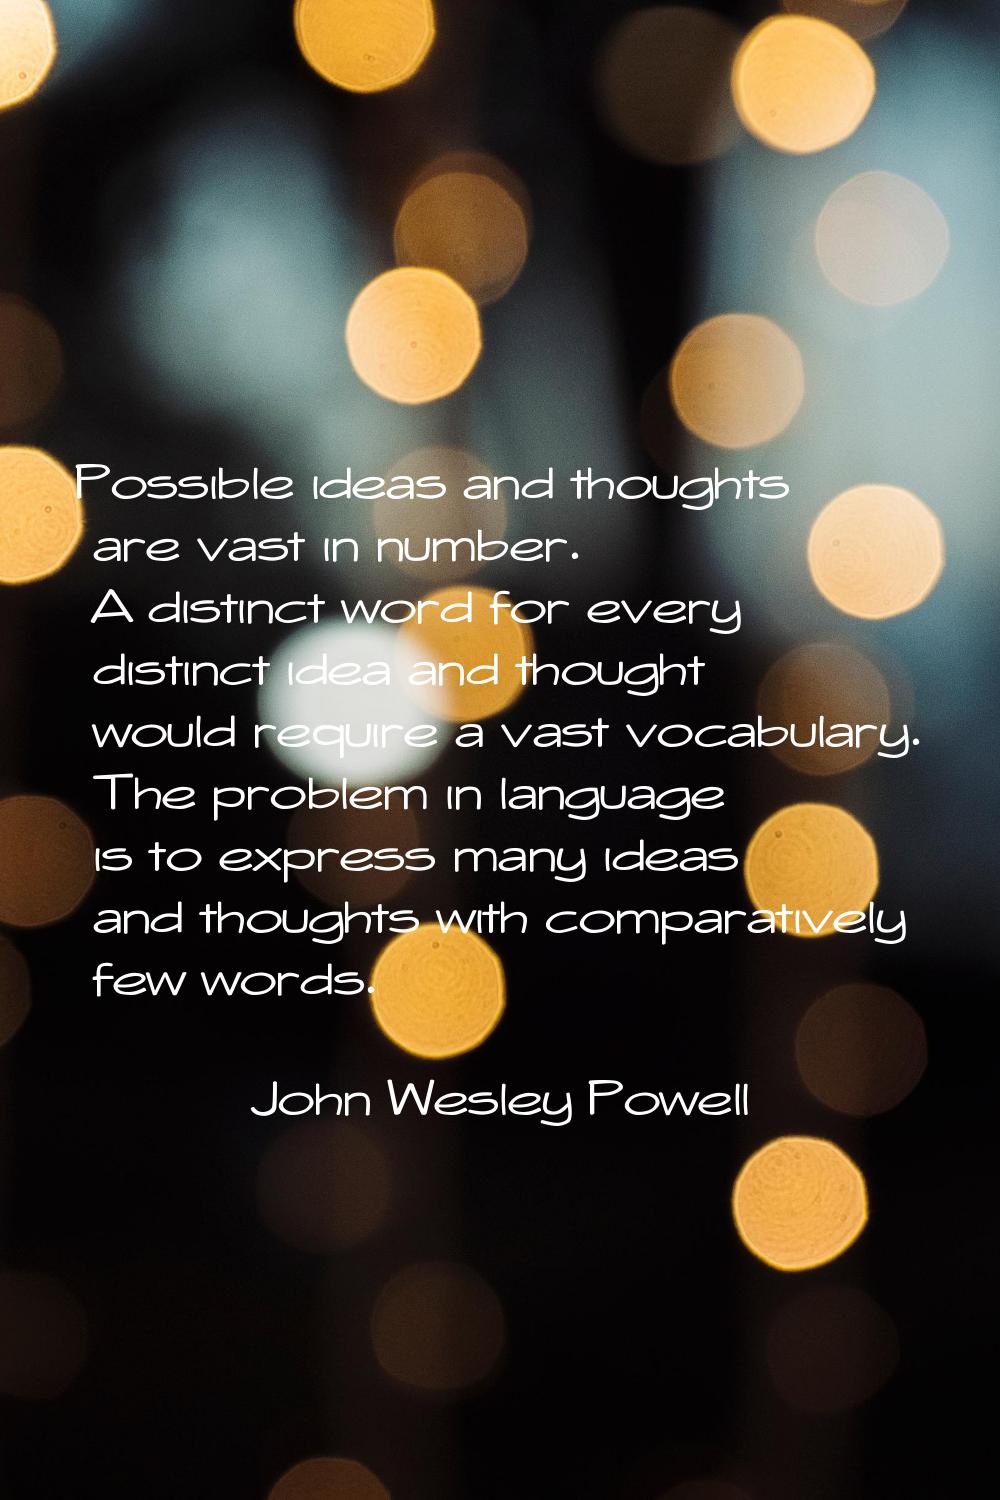 Possible ideas and thoughts are vast in number. A distinct word for every distinct idea and thought